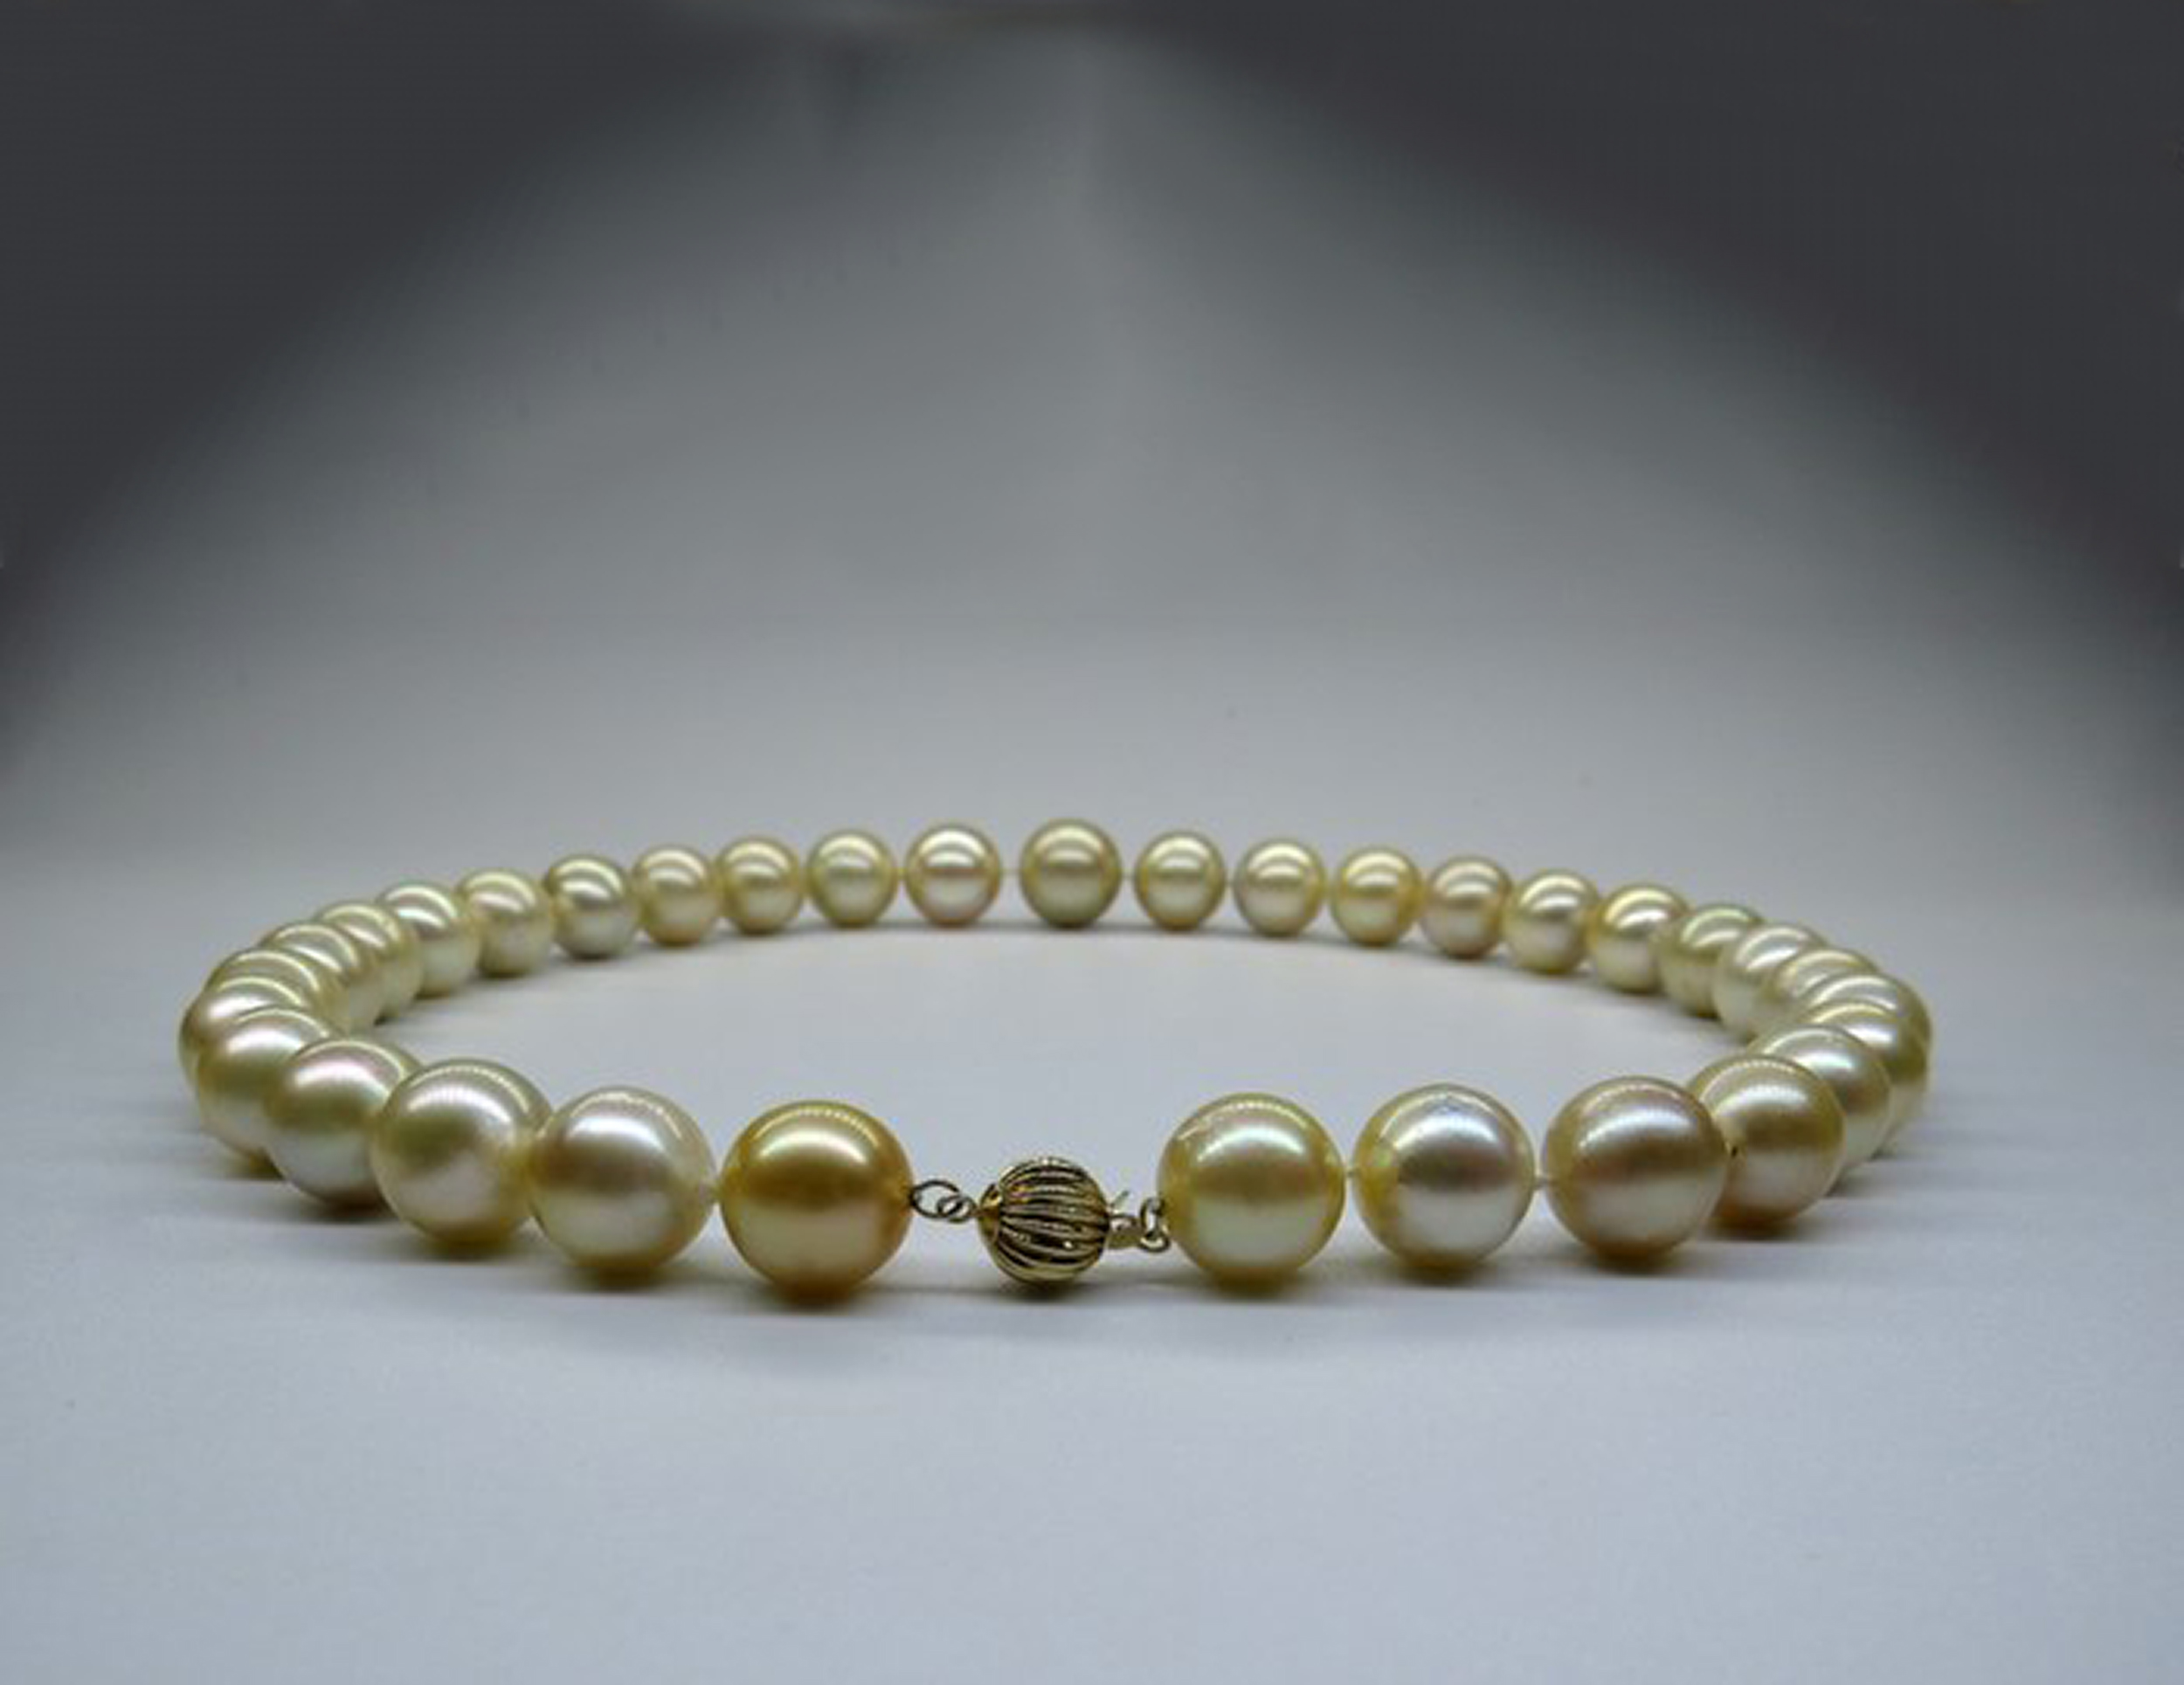 Necklace in Cream and Gold Toned Australian Pearl Necklace with 14k Yellow Gold Gallon Ball Clasp - Bild 4 aus 5